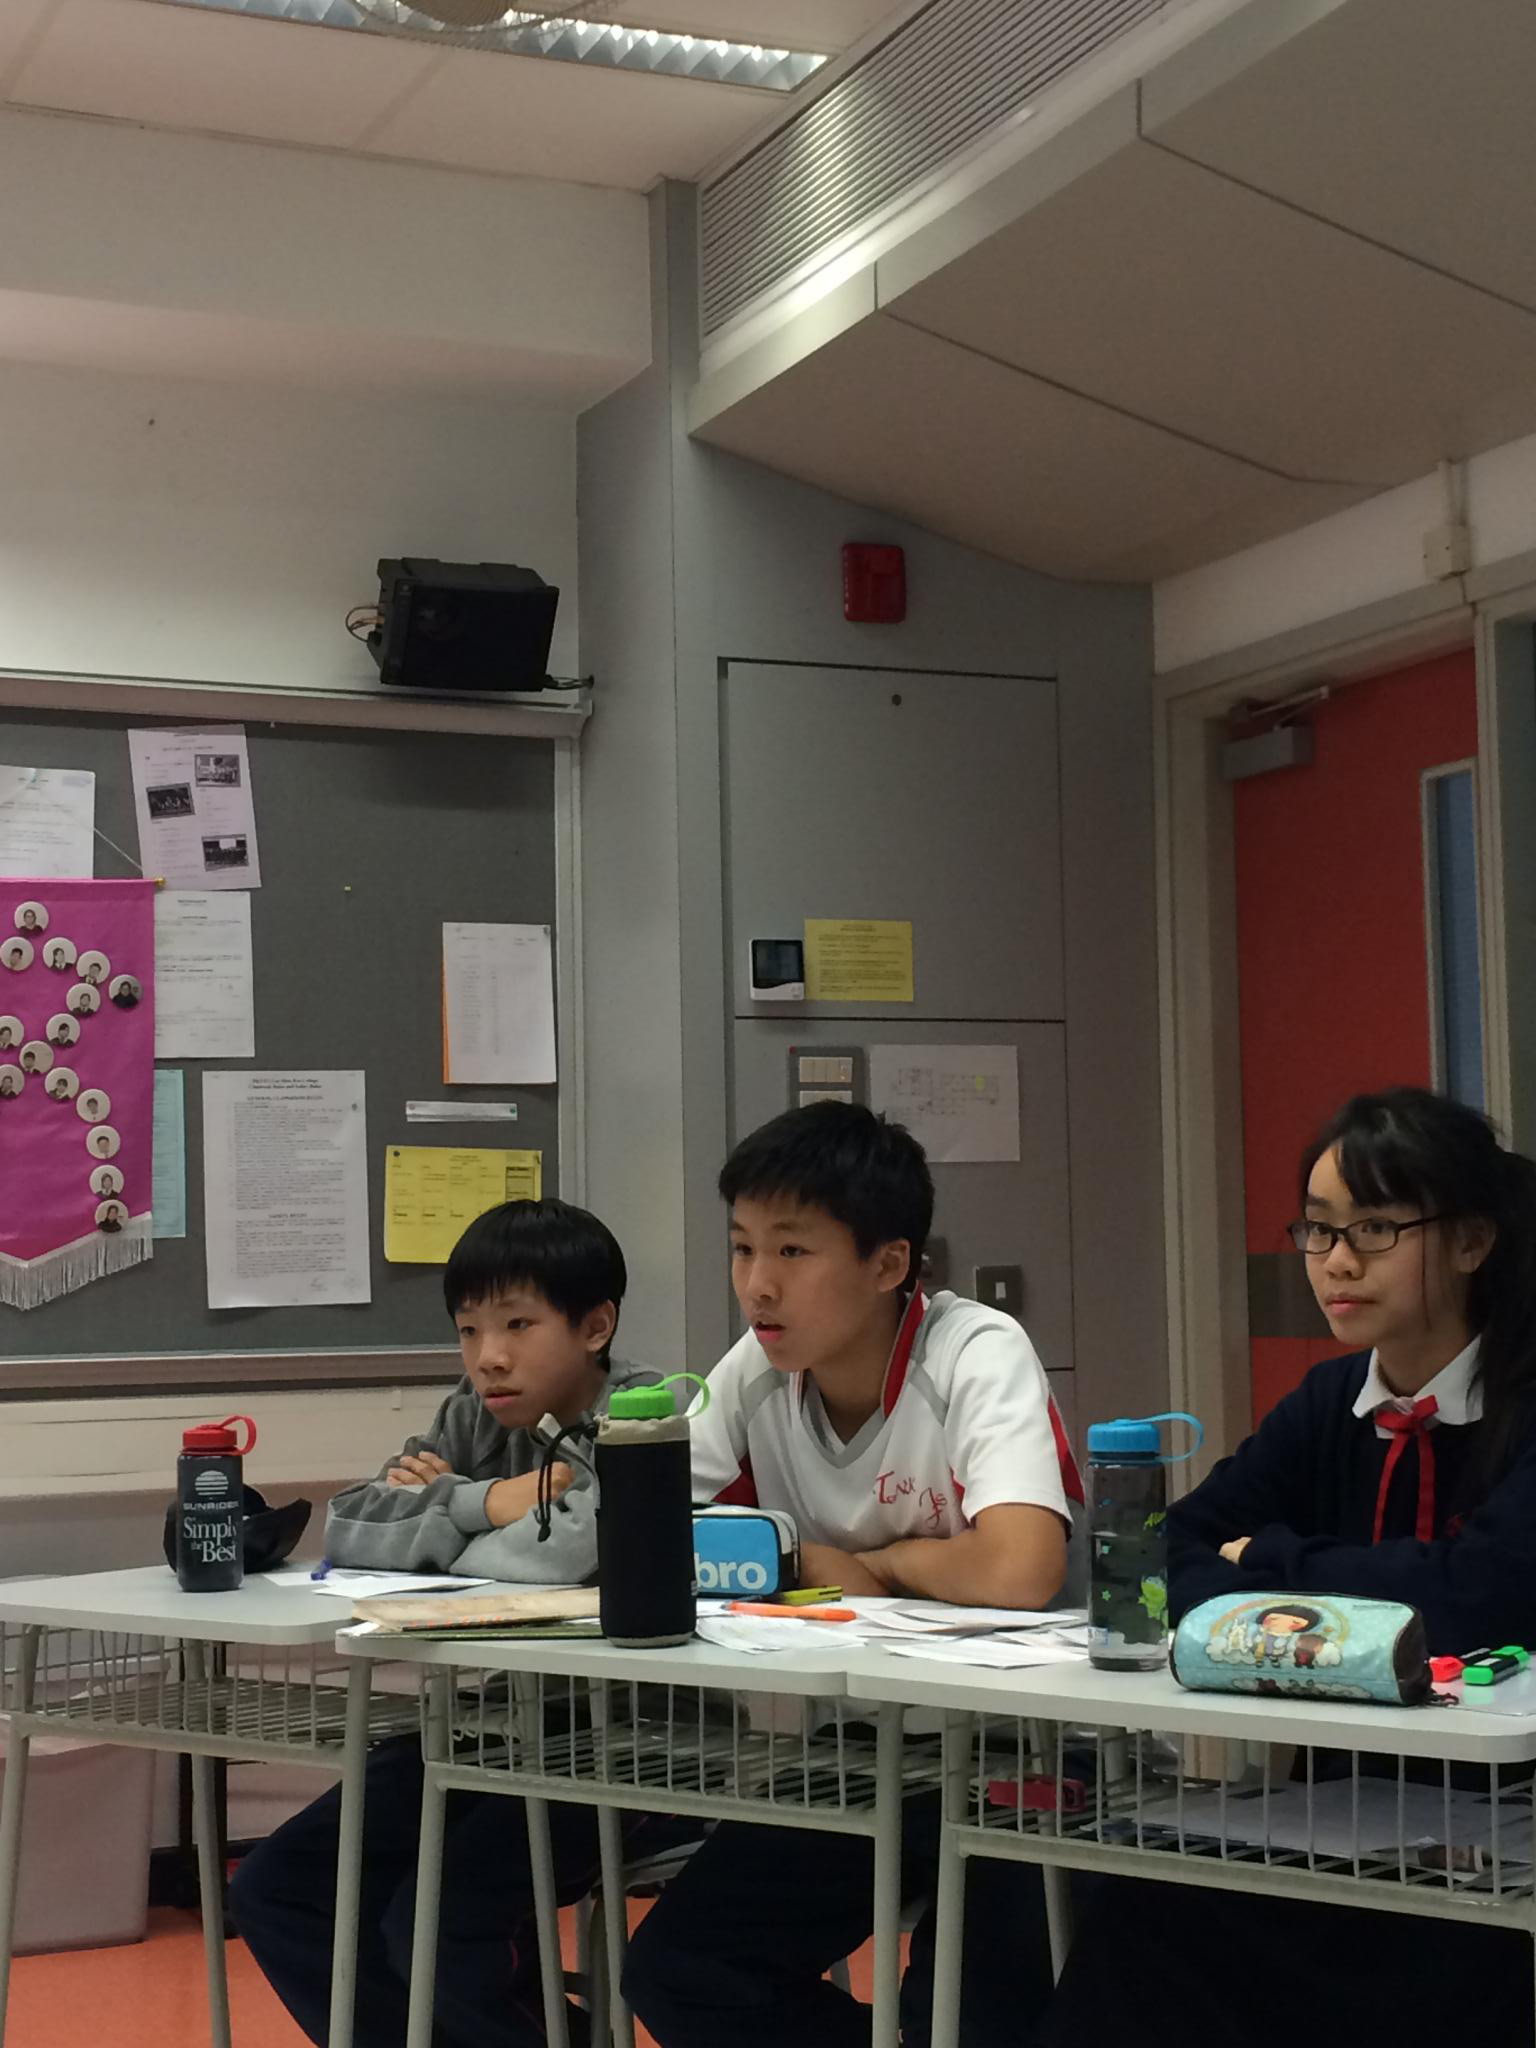 Our debating Team members are deep in thought for their speech.